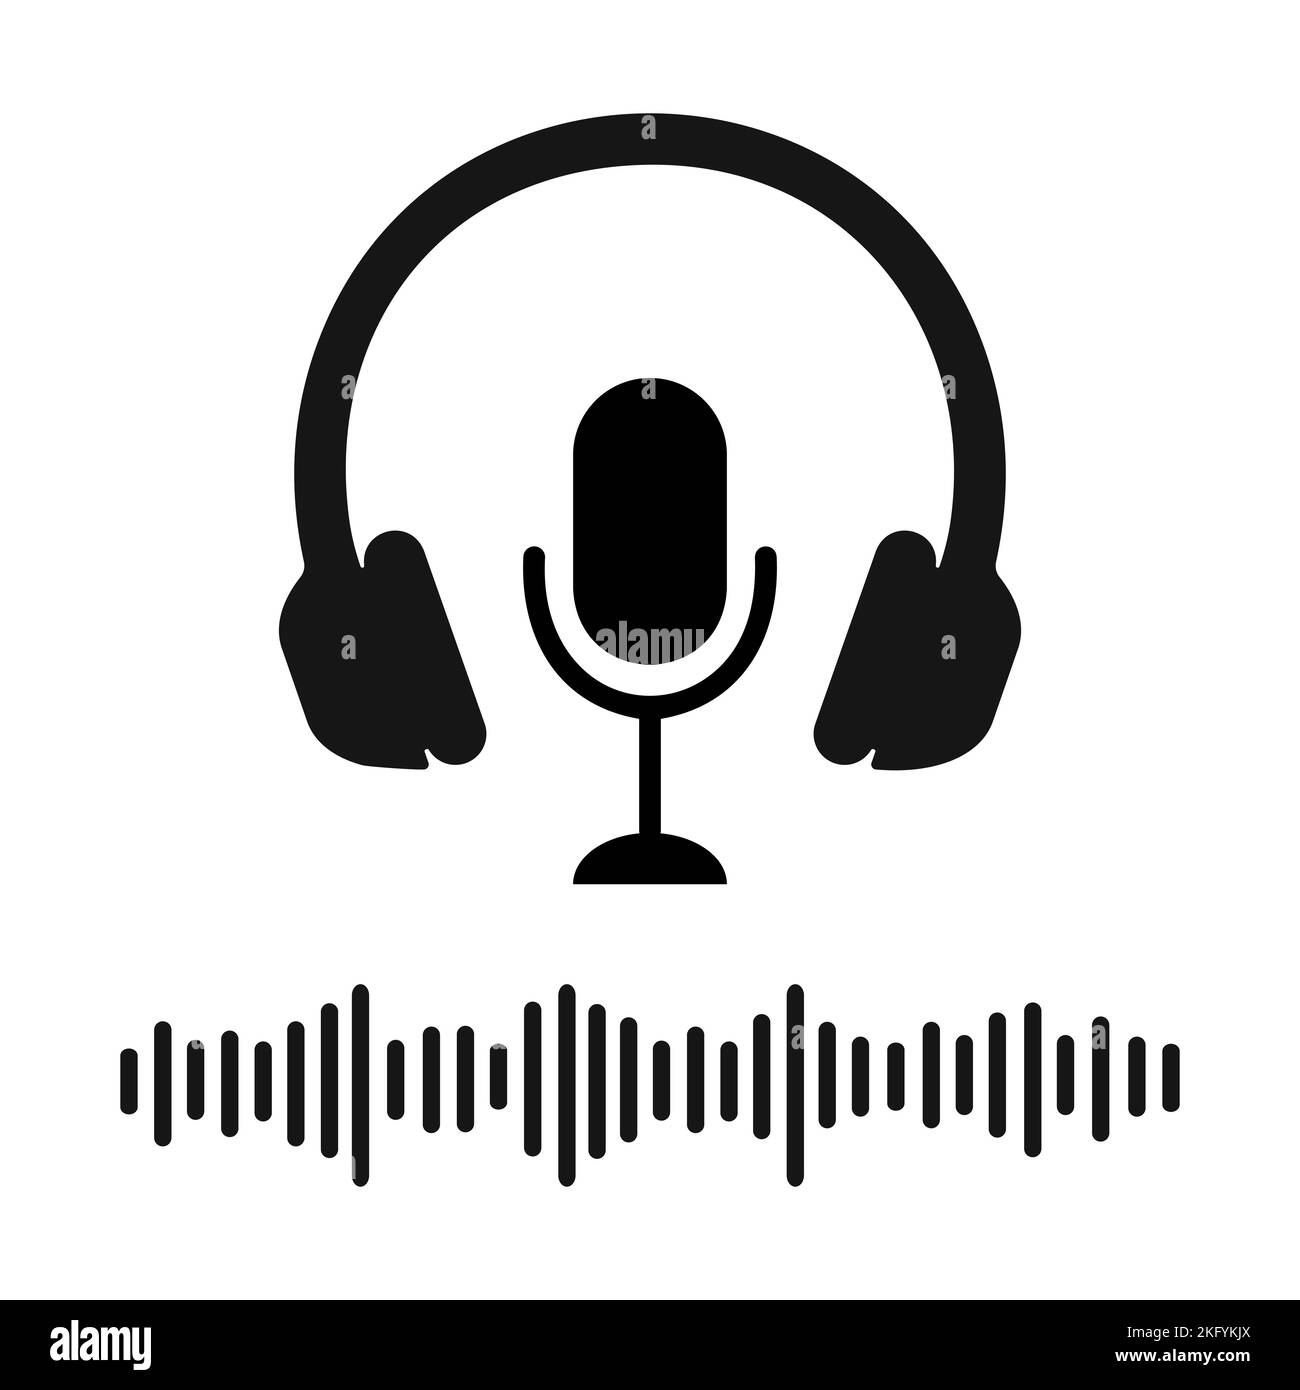 Headphones, microphone and sound wave icons. Online radio, concert, song recording, streaming, podcast, broadcast pictogram. Vector graphic illustration. Stock Vector